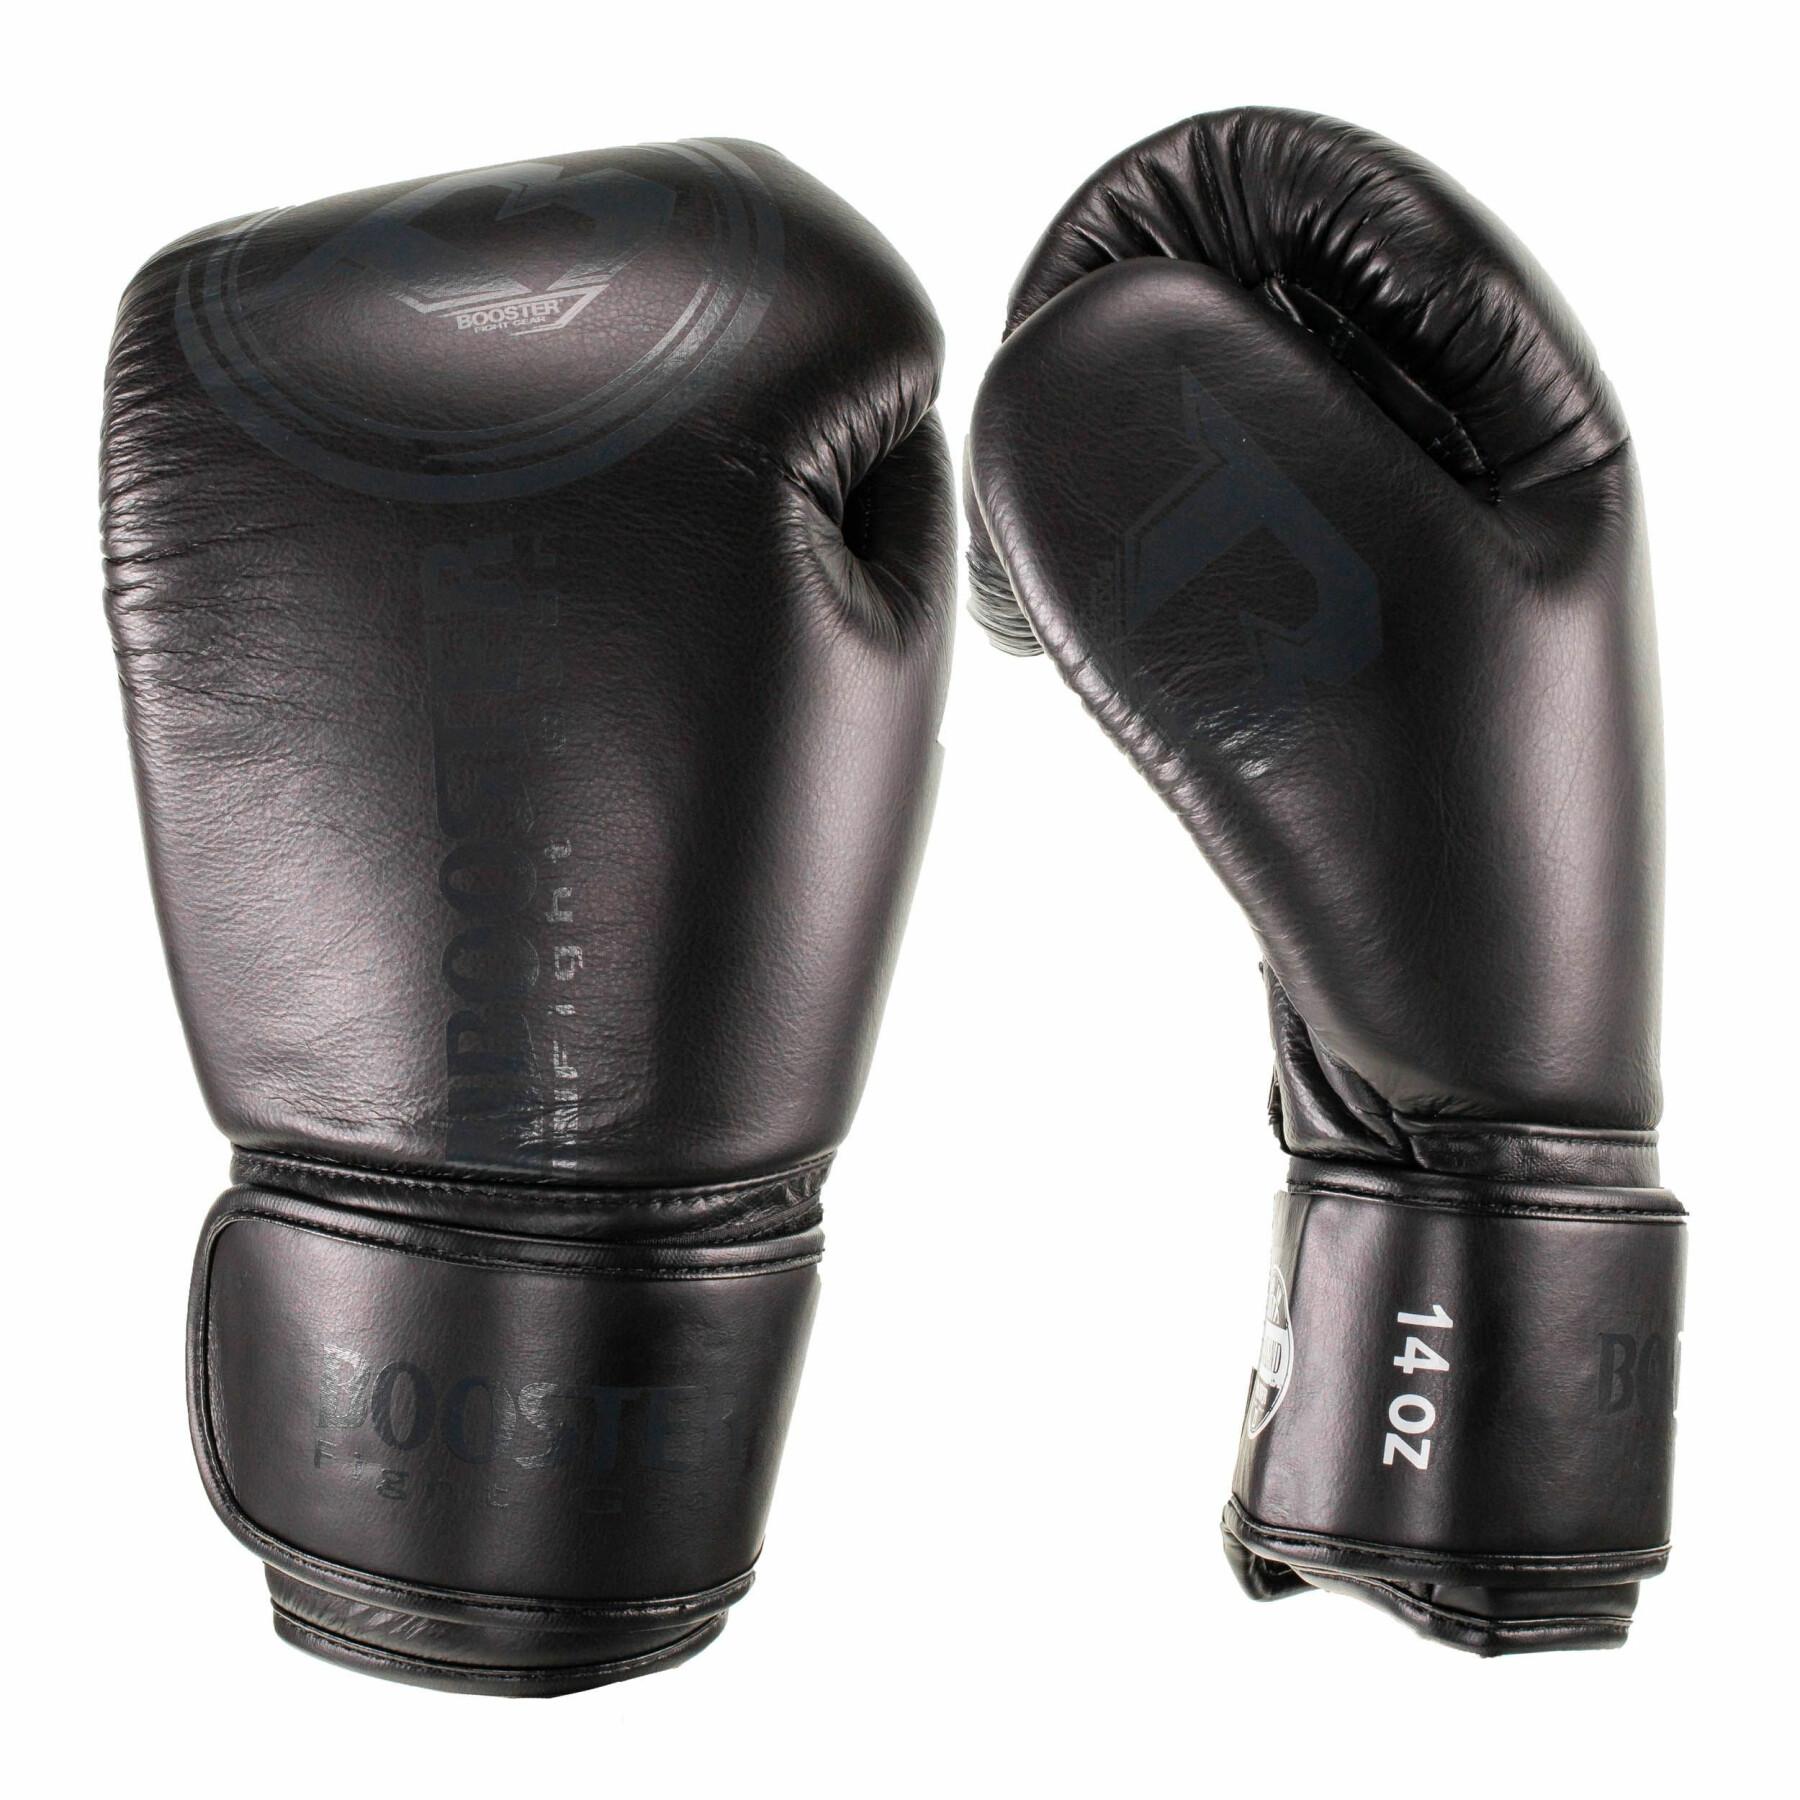 Boxing gloves Booster Fight Gear Bgl Dominance 4